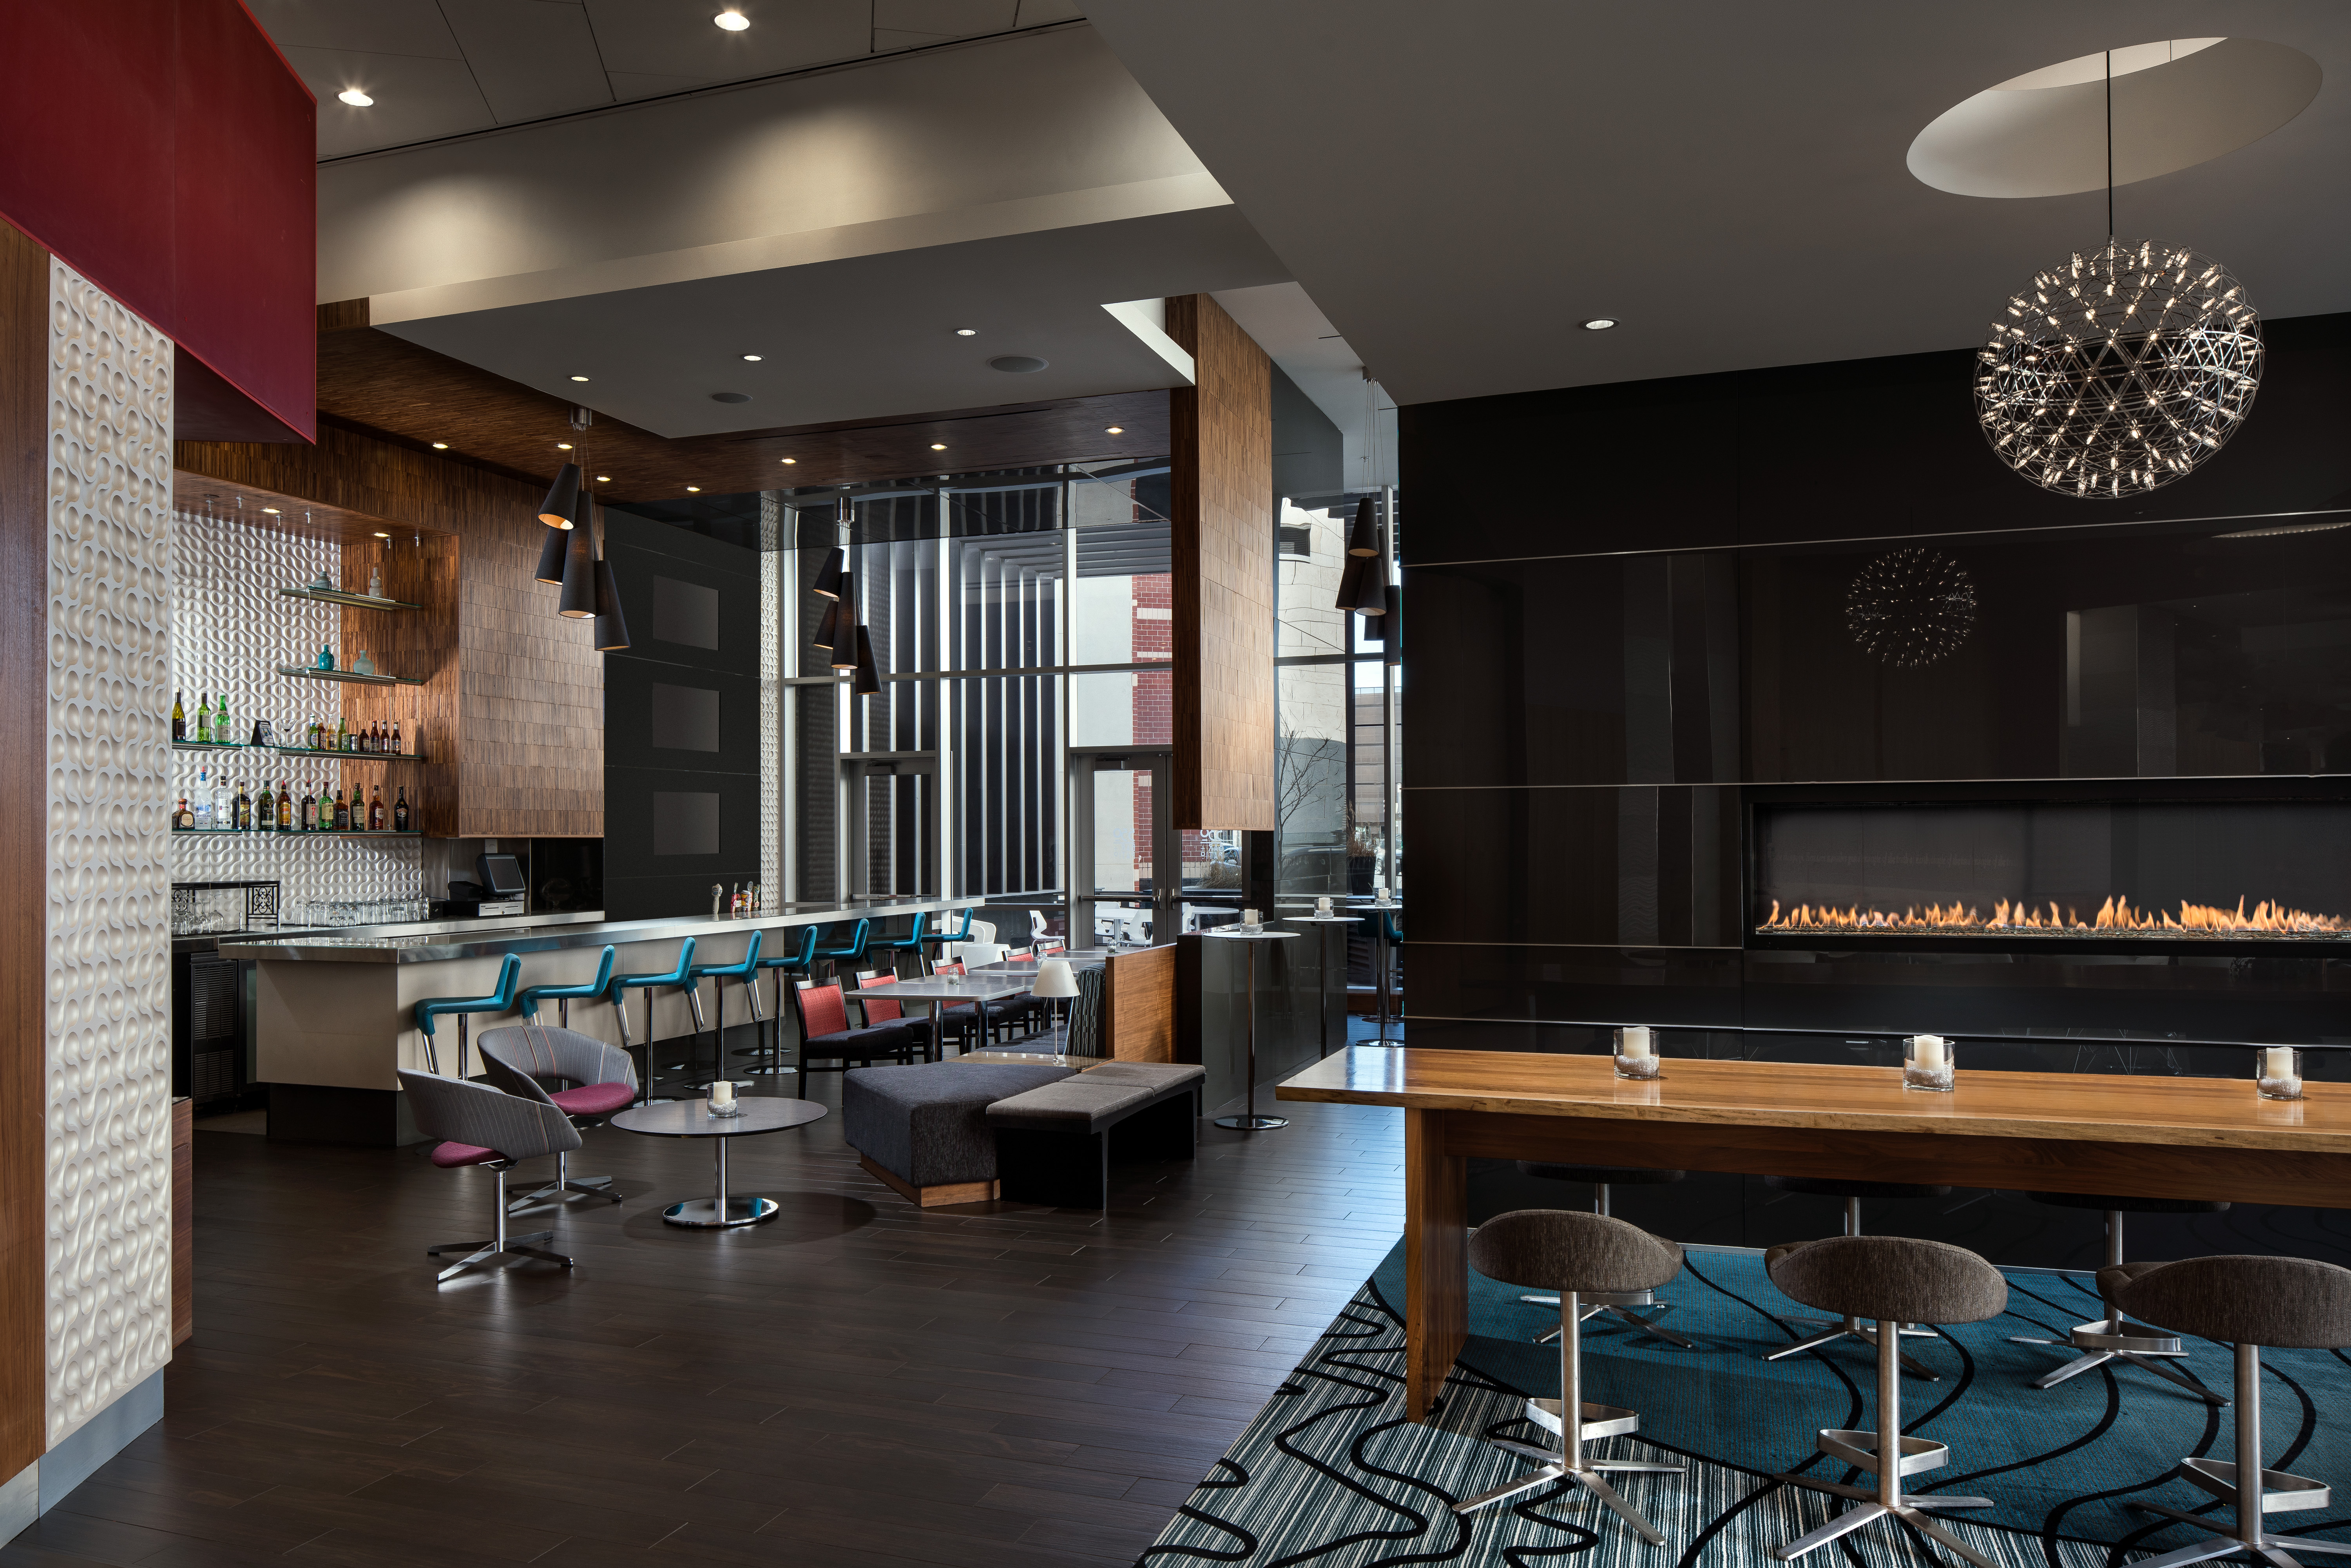 Homewood Suites by Hilton Hotel Denver Downtown-Convention Center, CO -Lobby Bar